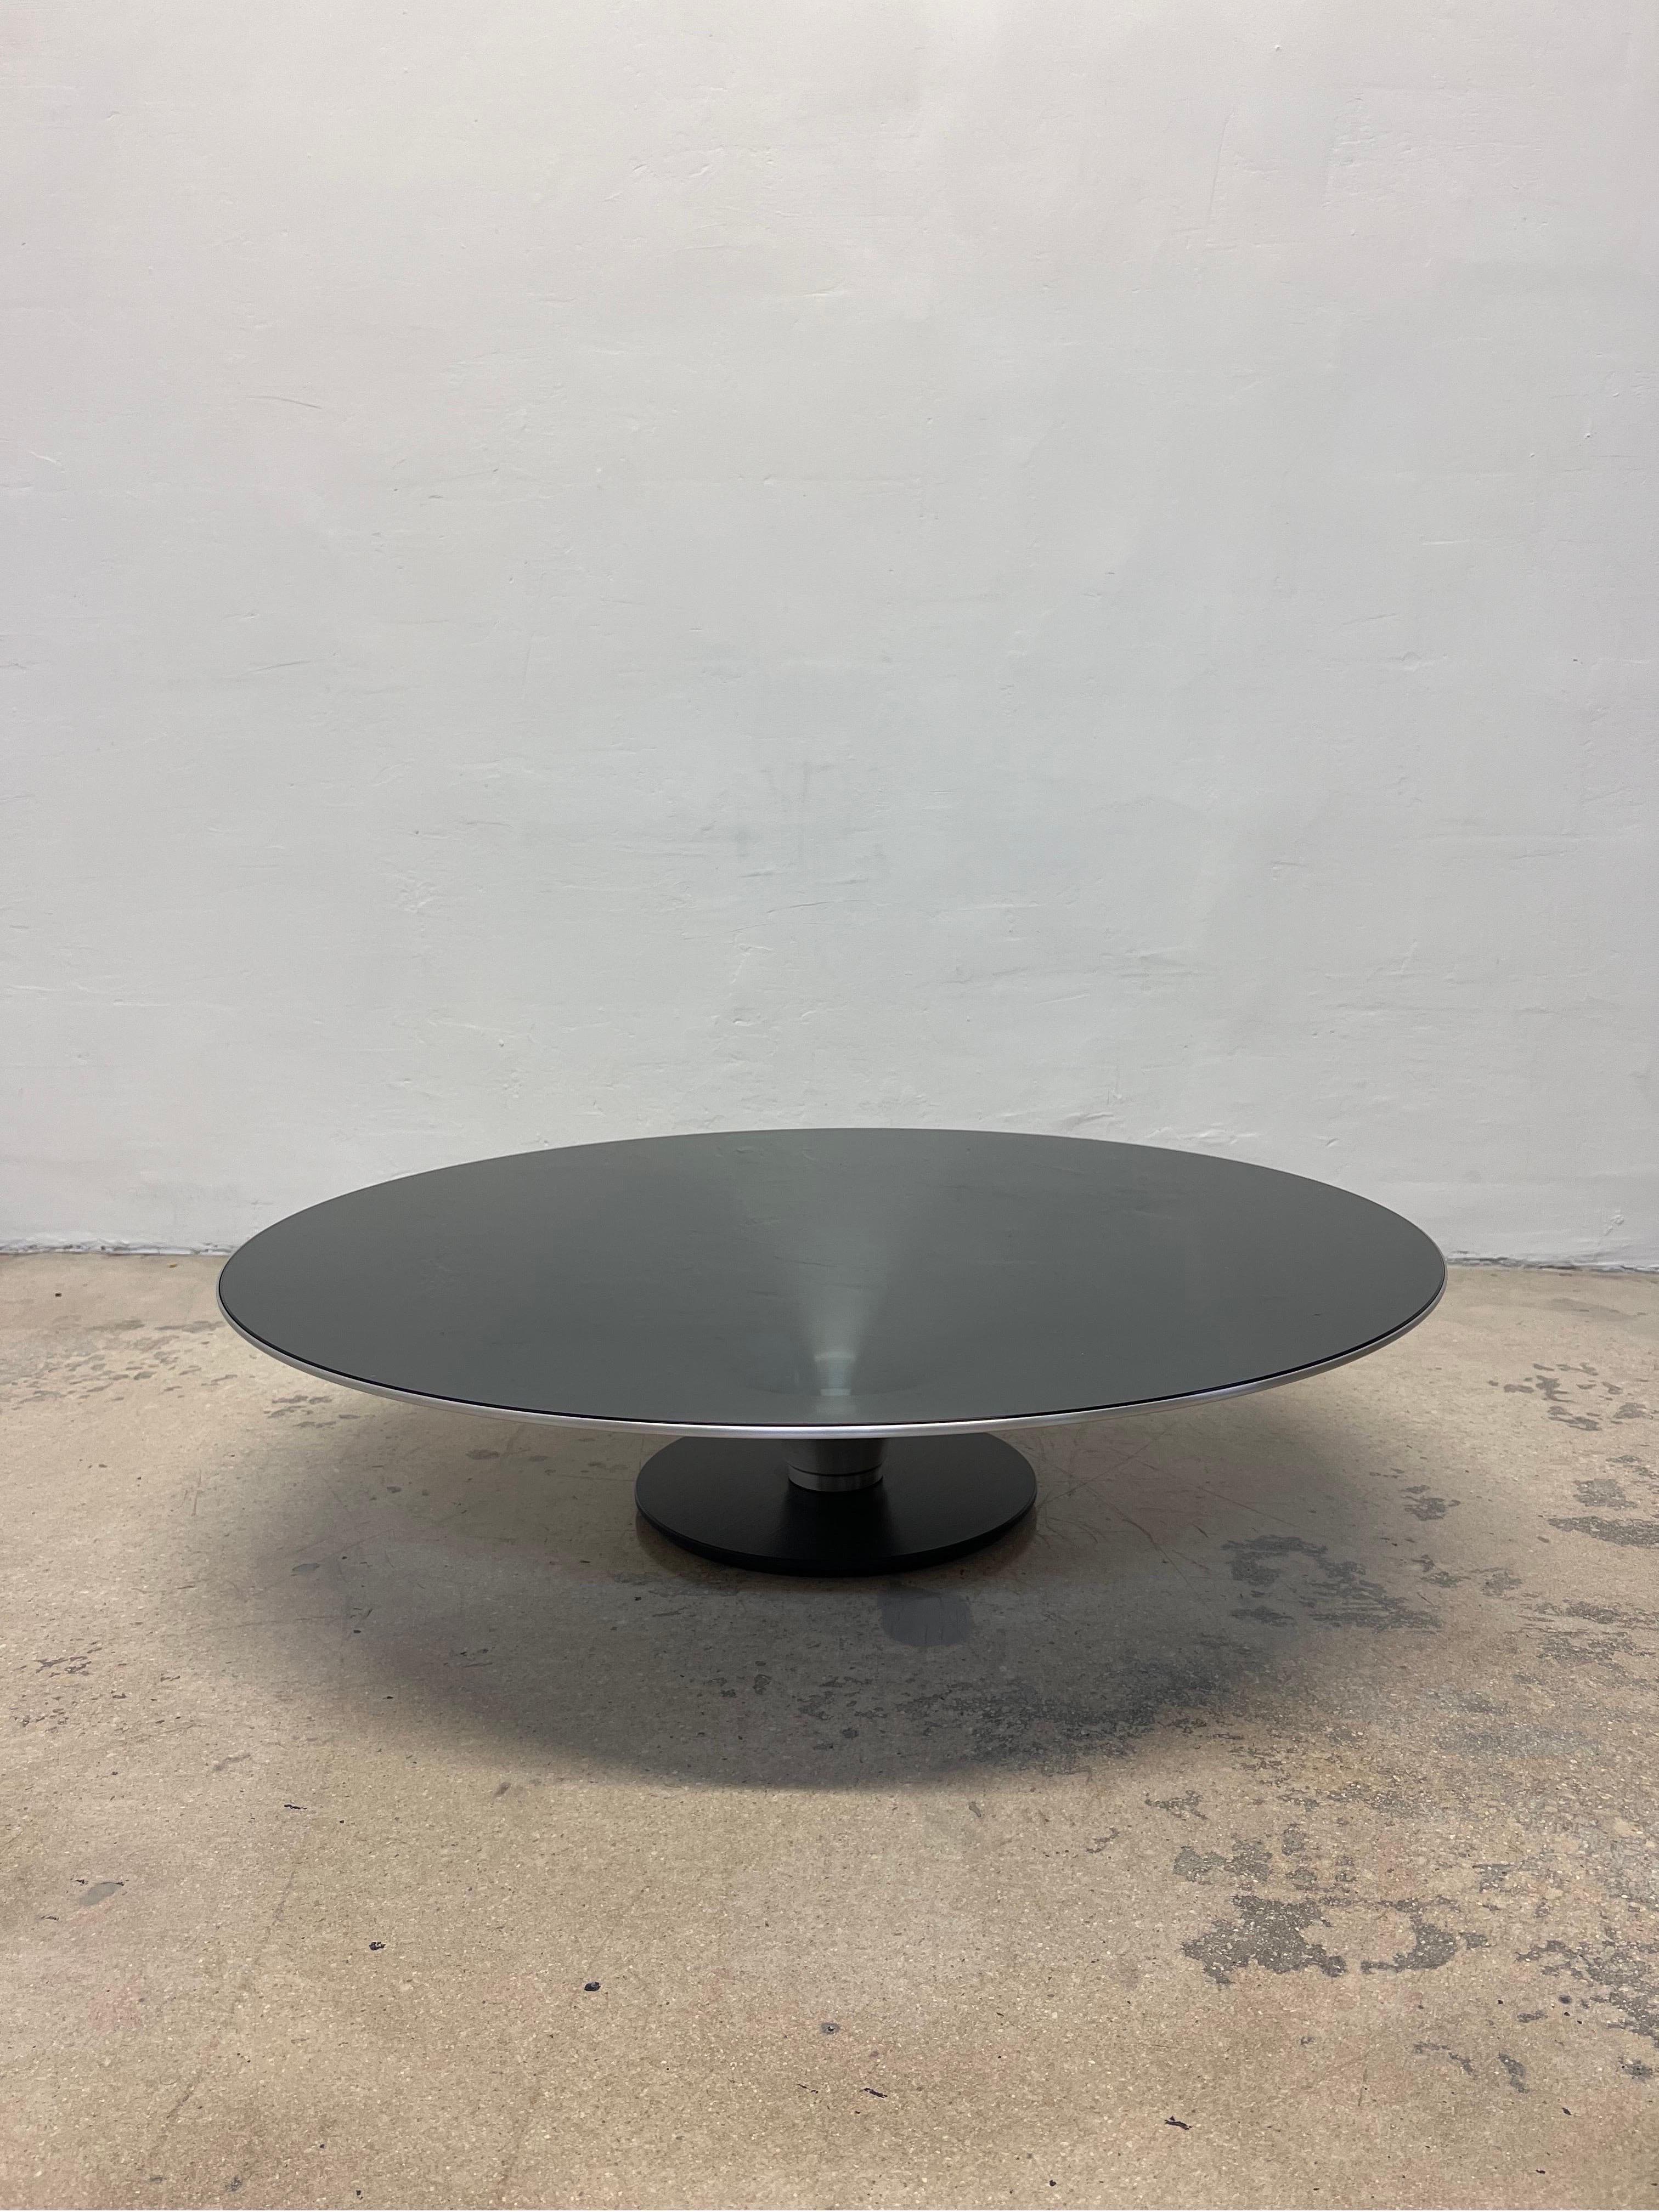 Roche Bobois low OVNI ø.90 cocktail table designed by Vincenzo Maiolino. The steel base has a black matte finish while the aluminum cone table structure is natural with a clear coat varnish to protect the finish. The smoked glass is 6mm thick,